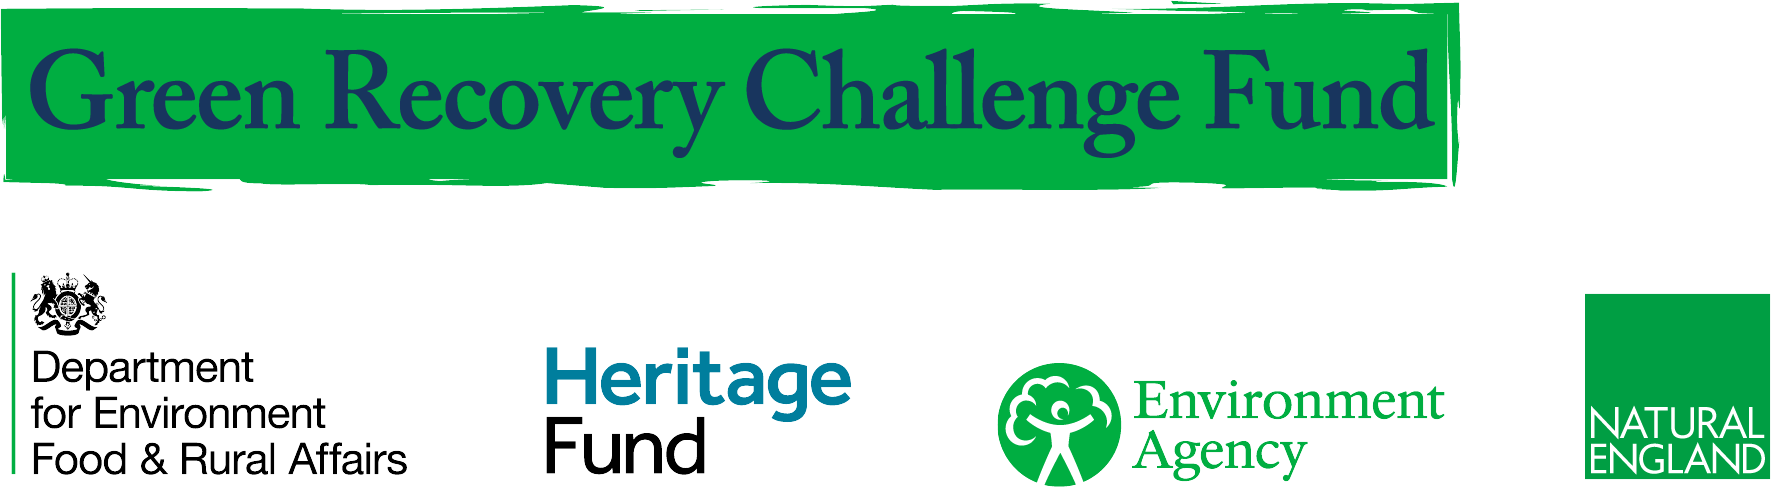 Green Recovery Challenge Fund Logos